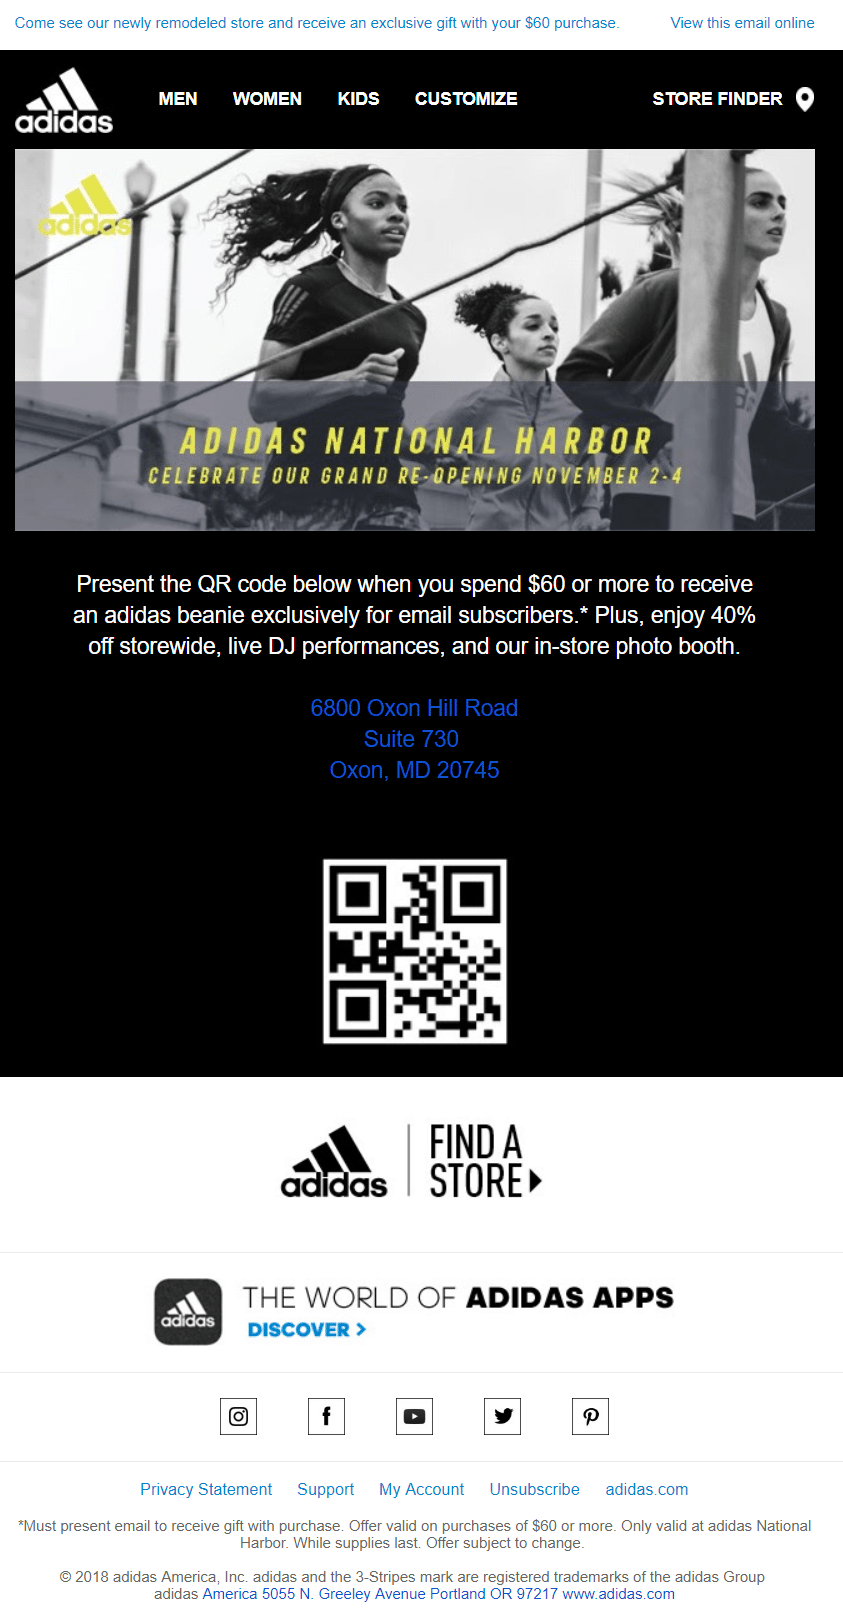 Adidas email example - What is Personalization in Email Marketing?